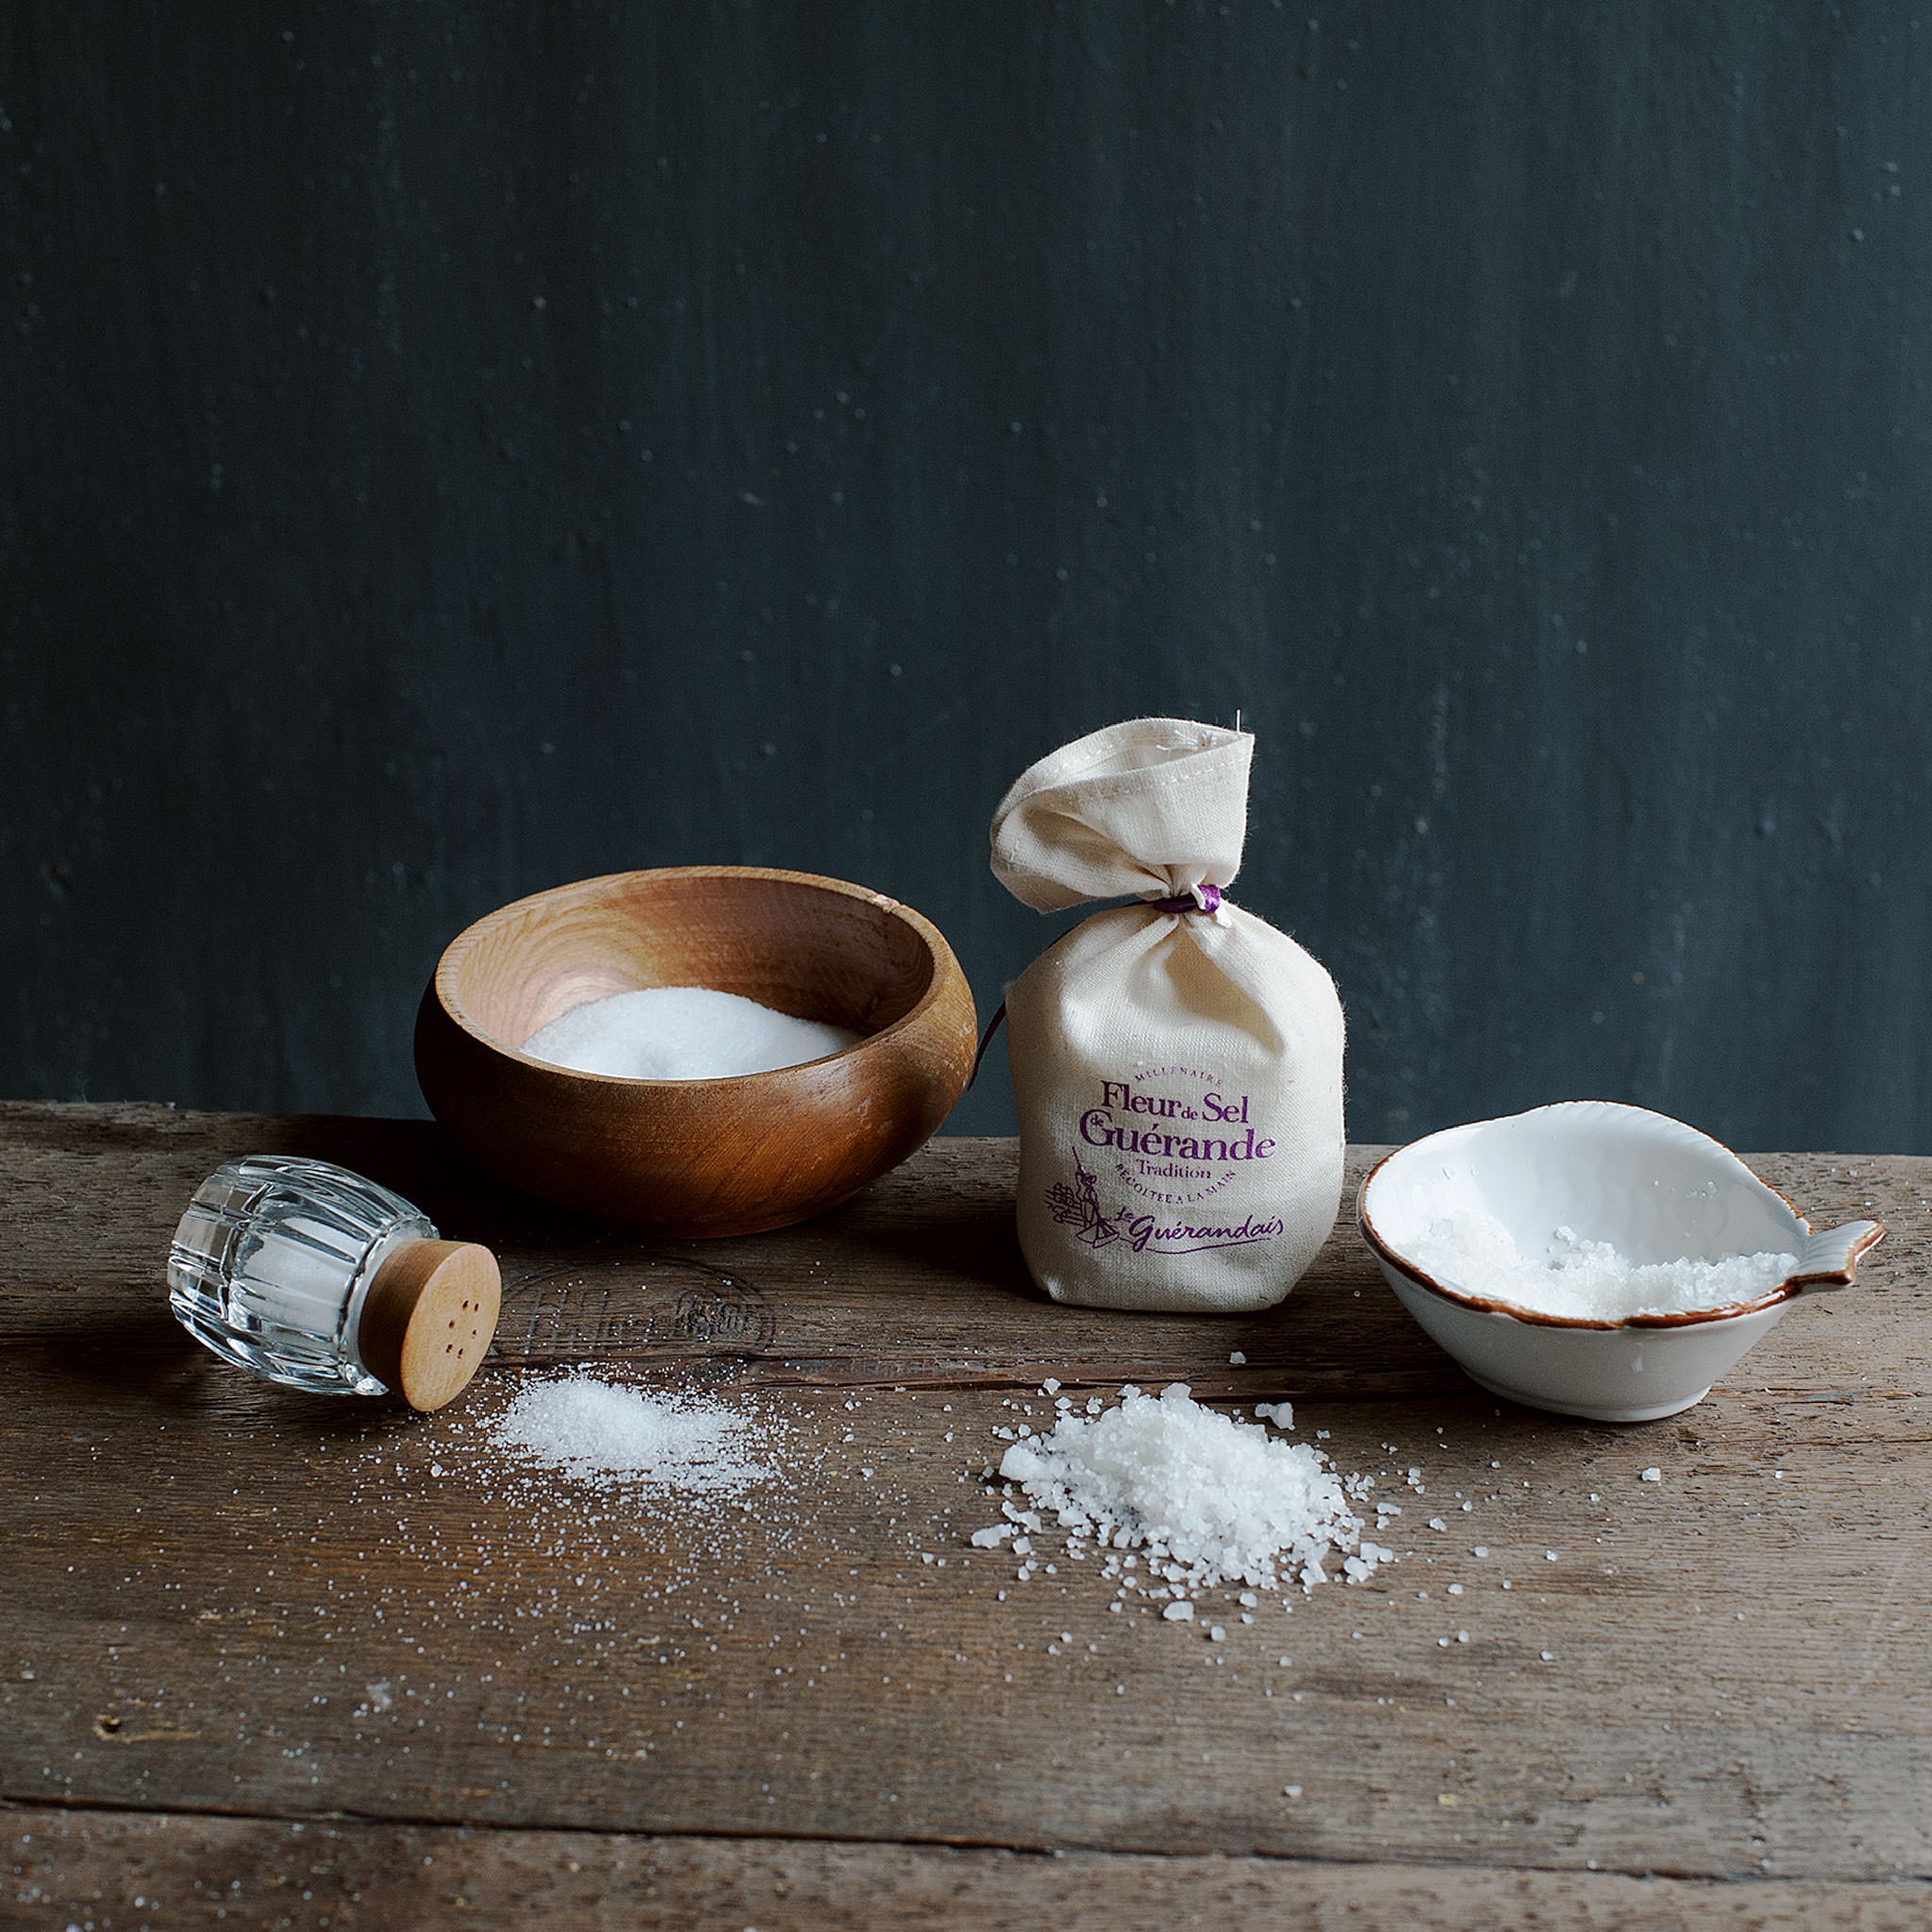 5 Salts Every Home Cook Should Own